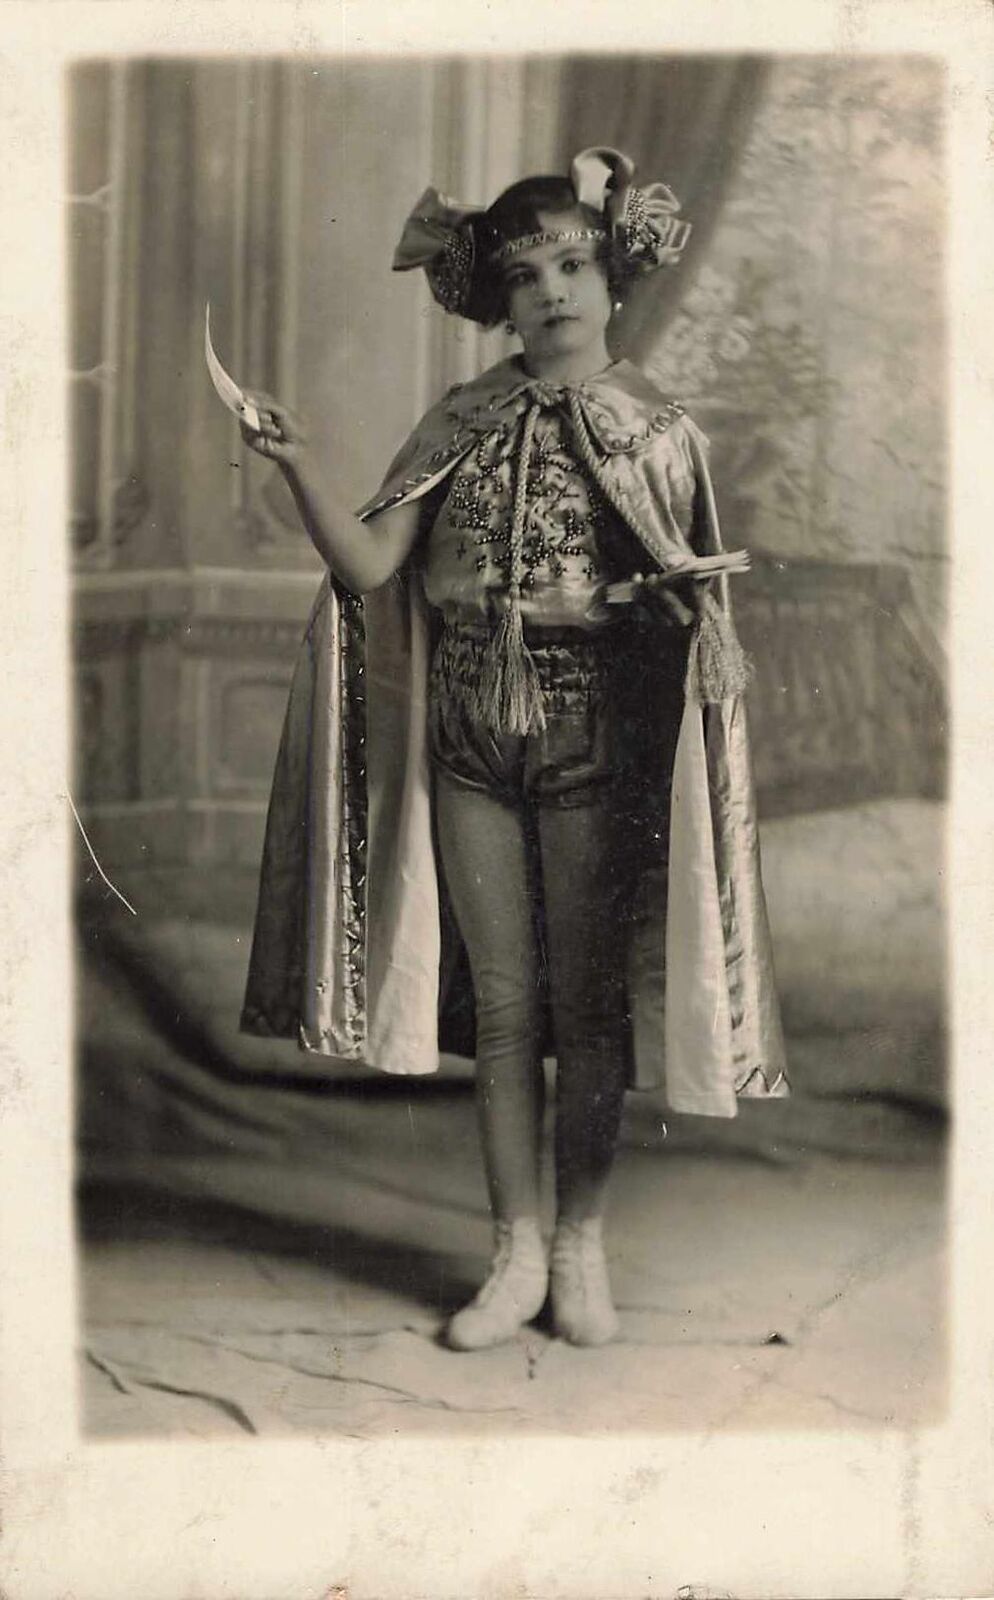 1920s RPPC Mexican Girl Circus Performer Outfit Cards Beautiful Costume Photo